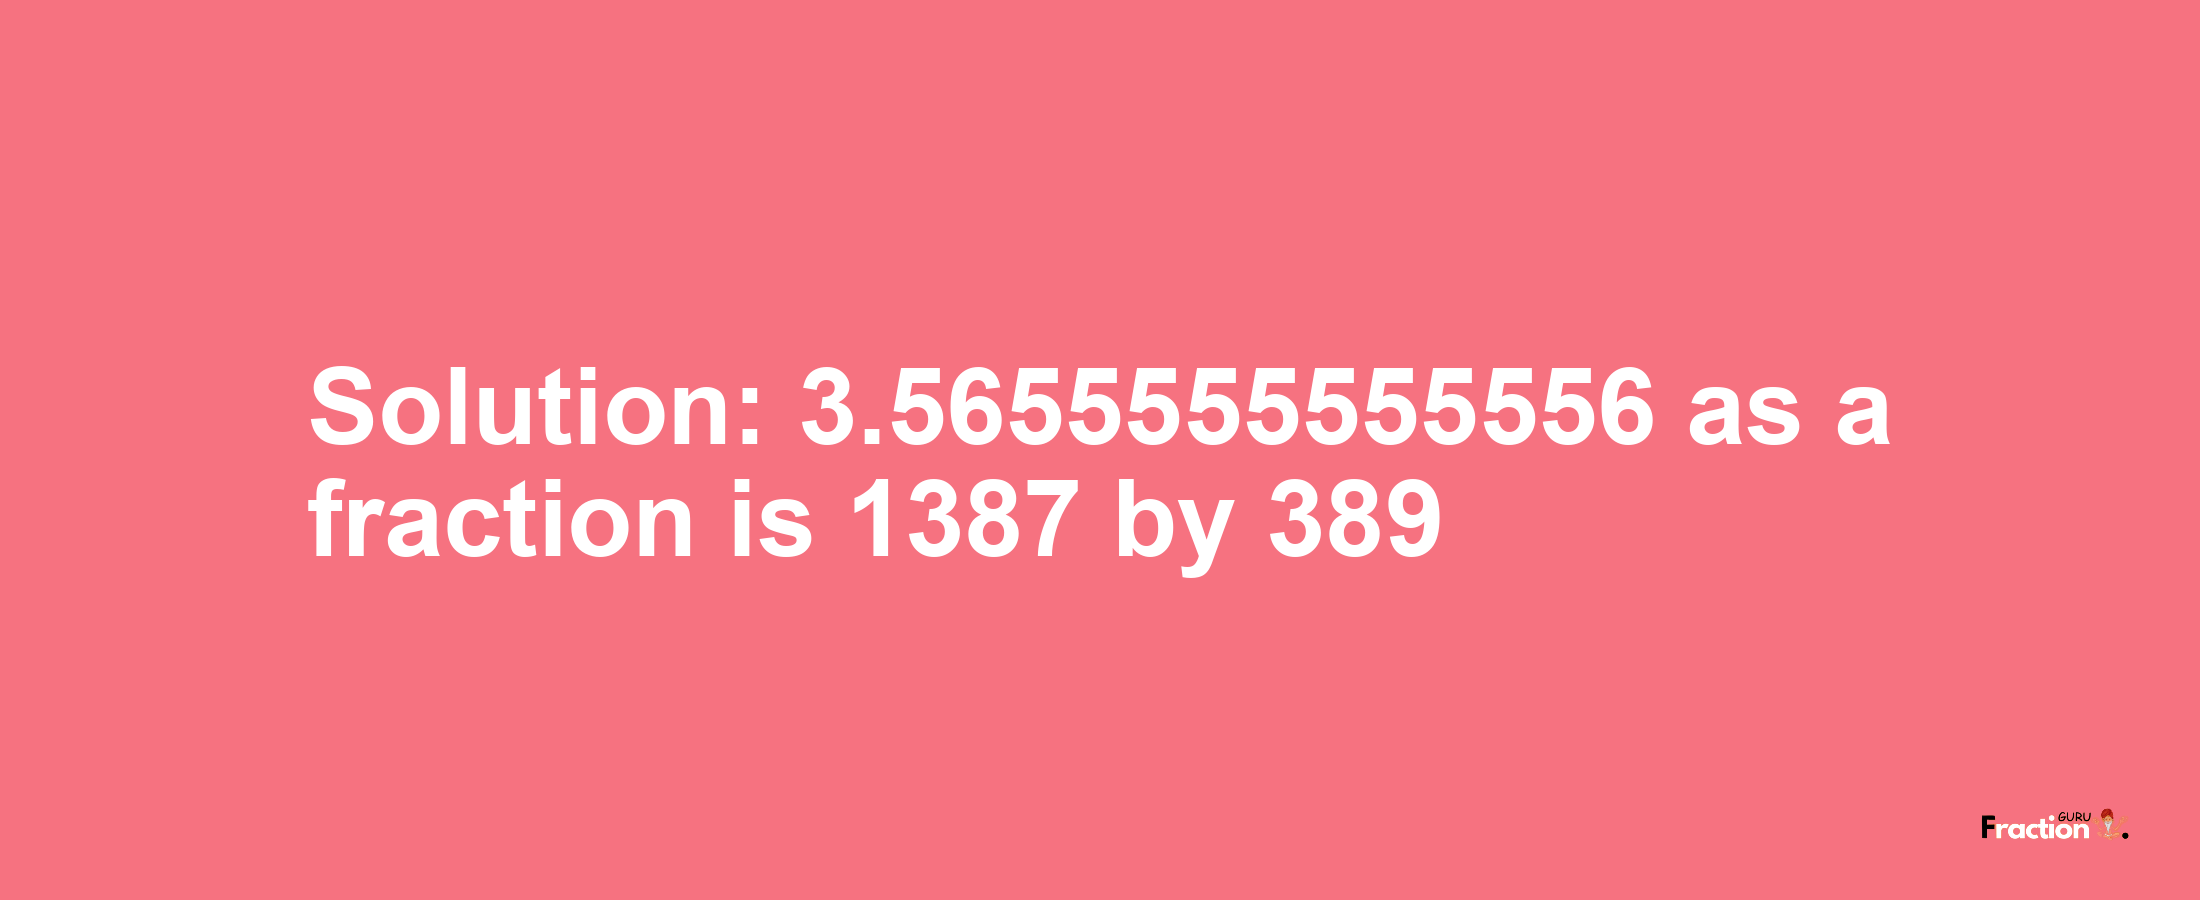 Solution:3.5655555555556 as a fraction is 1387/389